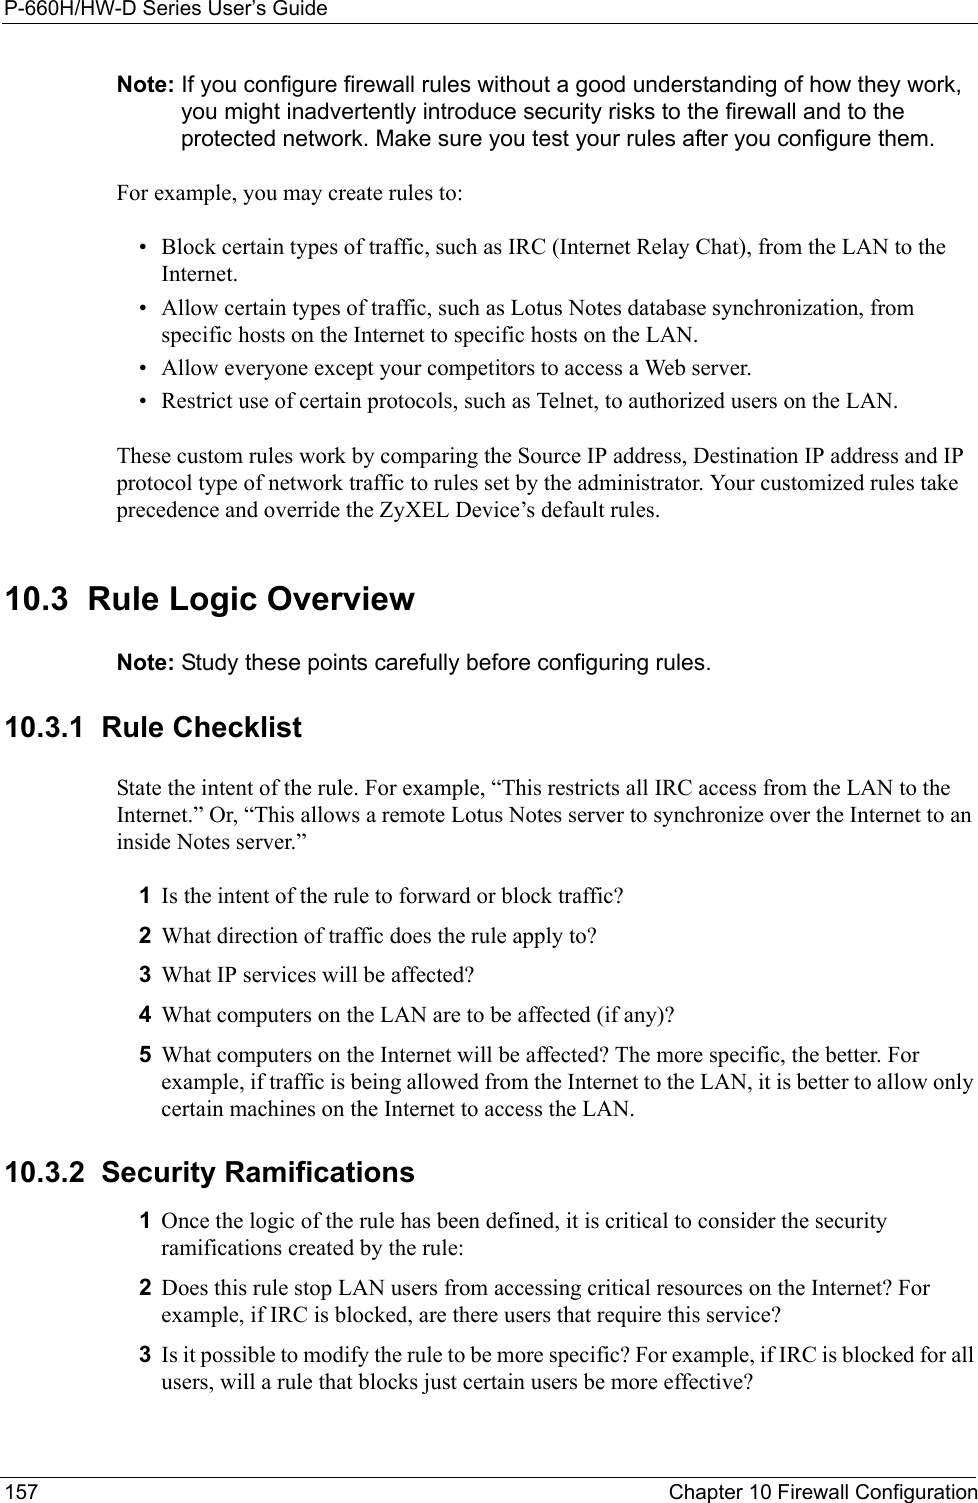 P-660H/HW-D Series User’s Guide157 Chapter 10 Firewall ConfigurationNote: If you configure firewall rules without a good understanding of how they work, you might inadvertently introduce security risks to the firewall and to the protected network. Make sure you test your rules after you configure them.For example, you may create rules to:• Block certain types of traffic, such as IRC (Internet Relay Chat), from the LAN to the Internet.• Allow certain types of traffic, such as Lotus Notes database synchronization, from specific hosts on the Internet to specific hosts on the LAN.• Allow everyone except your competitors to access a Web server.• Restrict use of certain protocols, such as Telnet, to authorized users on the LAN.These custom rules work by comparing the Source IP address, Destination IP address and IP protocol type of network traffic to rules set by the administrator. Your customized rules take precedence and override the ZyXEL Device’s default rules. 10.3  Rule Logic Overview  Note: Study these points carefully before configuring rules.10.3.1  Rule ChecklistState the intent of the rule. For example, “This restricts all IRC access from the LAN to the Internet.” Or, “This allows a remote Lotus Notes server to synchronize over the Internet to an inside Notes server.”1Is the intent of the rule to forward or block traffic?2What direction of traffic does the rule apply to?3What IP services will be affected?4What computers on the LAN are to be affected (if any)?5What computers on the Internet will be affected? The more specific, the better. For example, if traffic is being allowed from the Internet to the LAN, it is better to allow only certain machines on the Internet to access the LAN.10.3.2  Security Ramifications1Once the logic of the rule has been defined, it is critical to consider the security ramifications created by the rule:2Does this rule stop LAN users from accessing critical resources on the Internet? For example, if IRC is blocked, are there users that require this service?3Is it possible to modify the rule to be more specific? For example, if IRC is blocked for all users, will a rule that blocks just certain users be more effective?